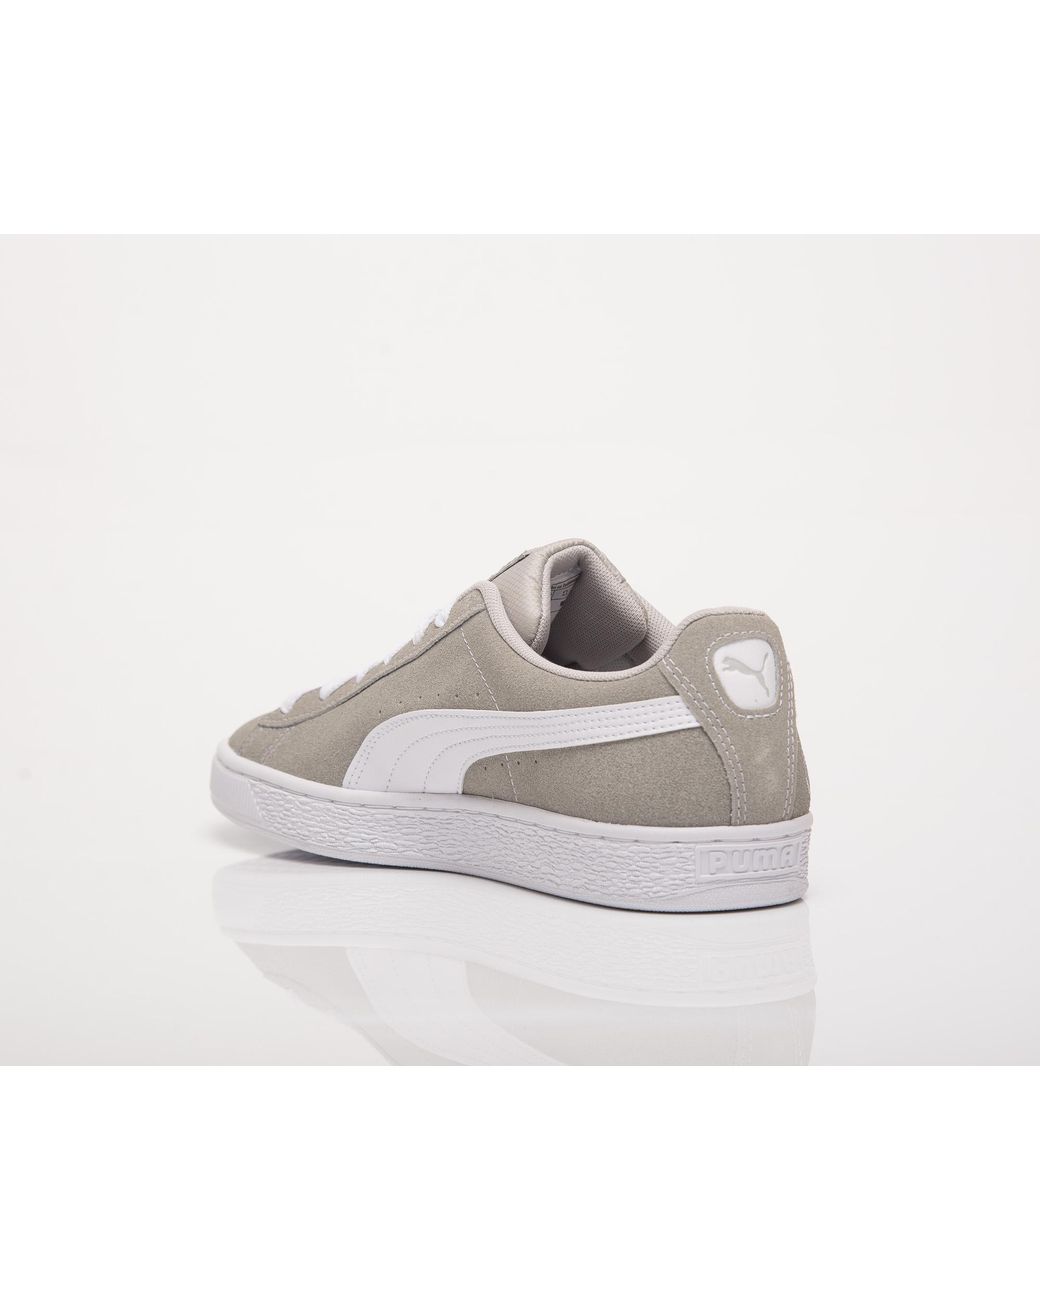 PUMA Suede Re:style for Men | Lyst